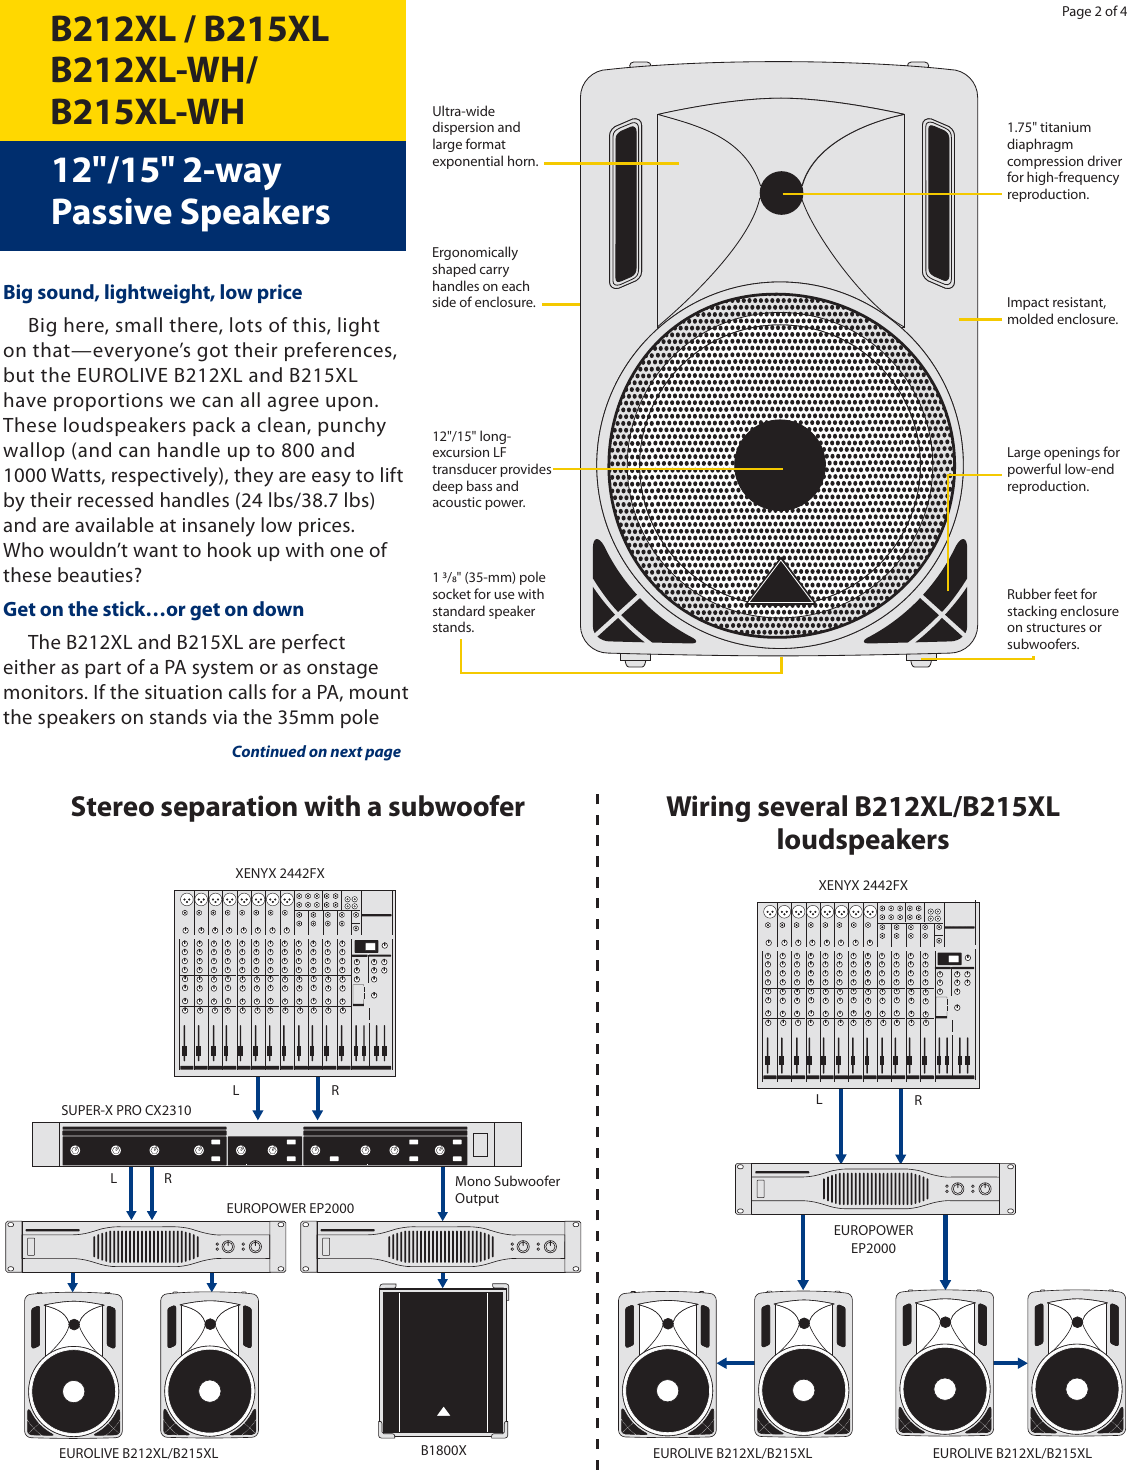 Page 2 of 4 - Behringer B212XL-WH IMPL Grap PH_P0A0R WeBrochure_2009-02-02_Rev.6 User Manual  To The 95acac01-d960-4686-9629-6efd023ba955